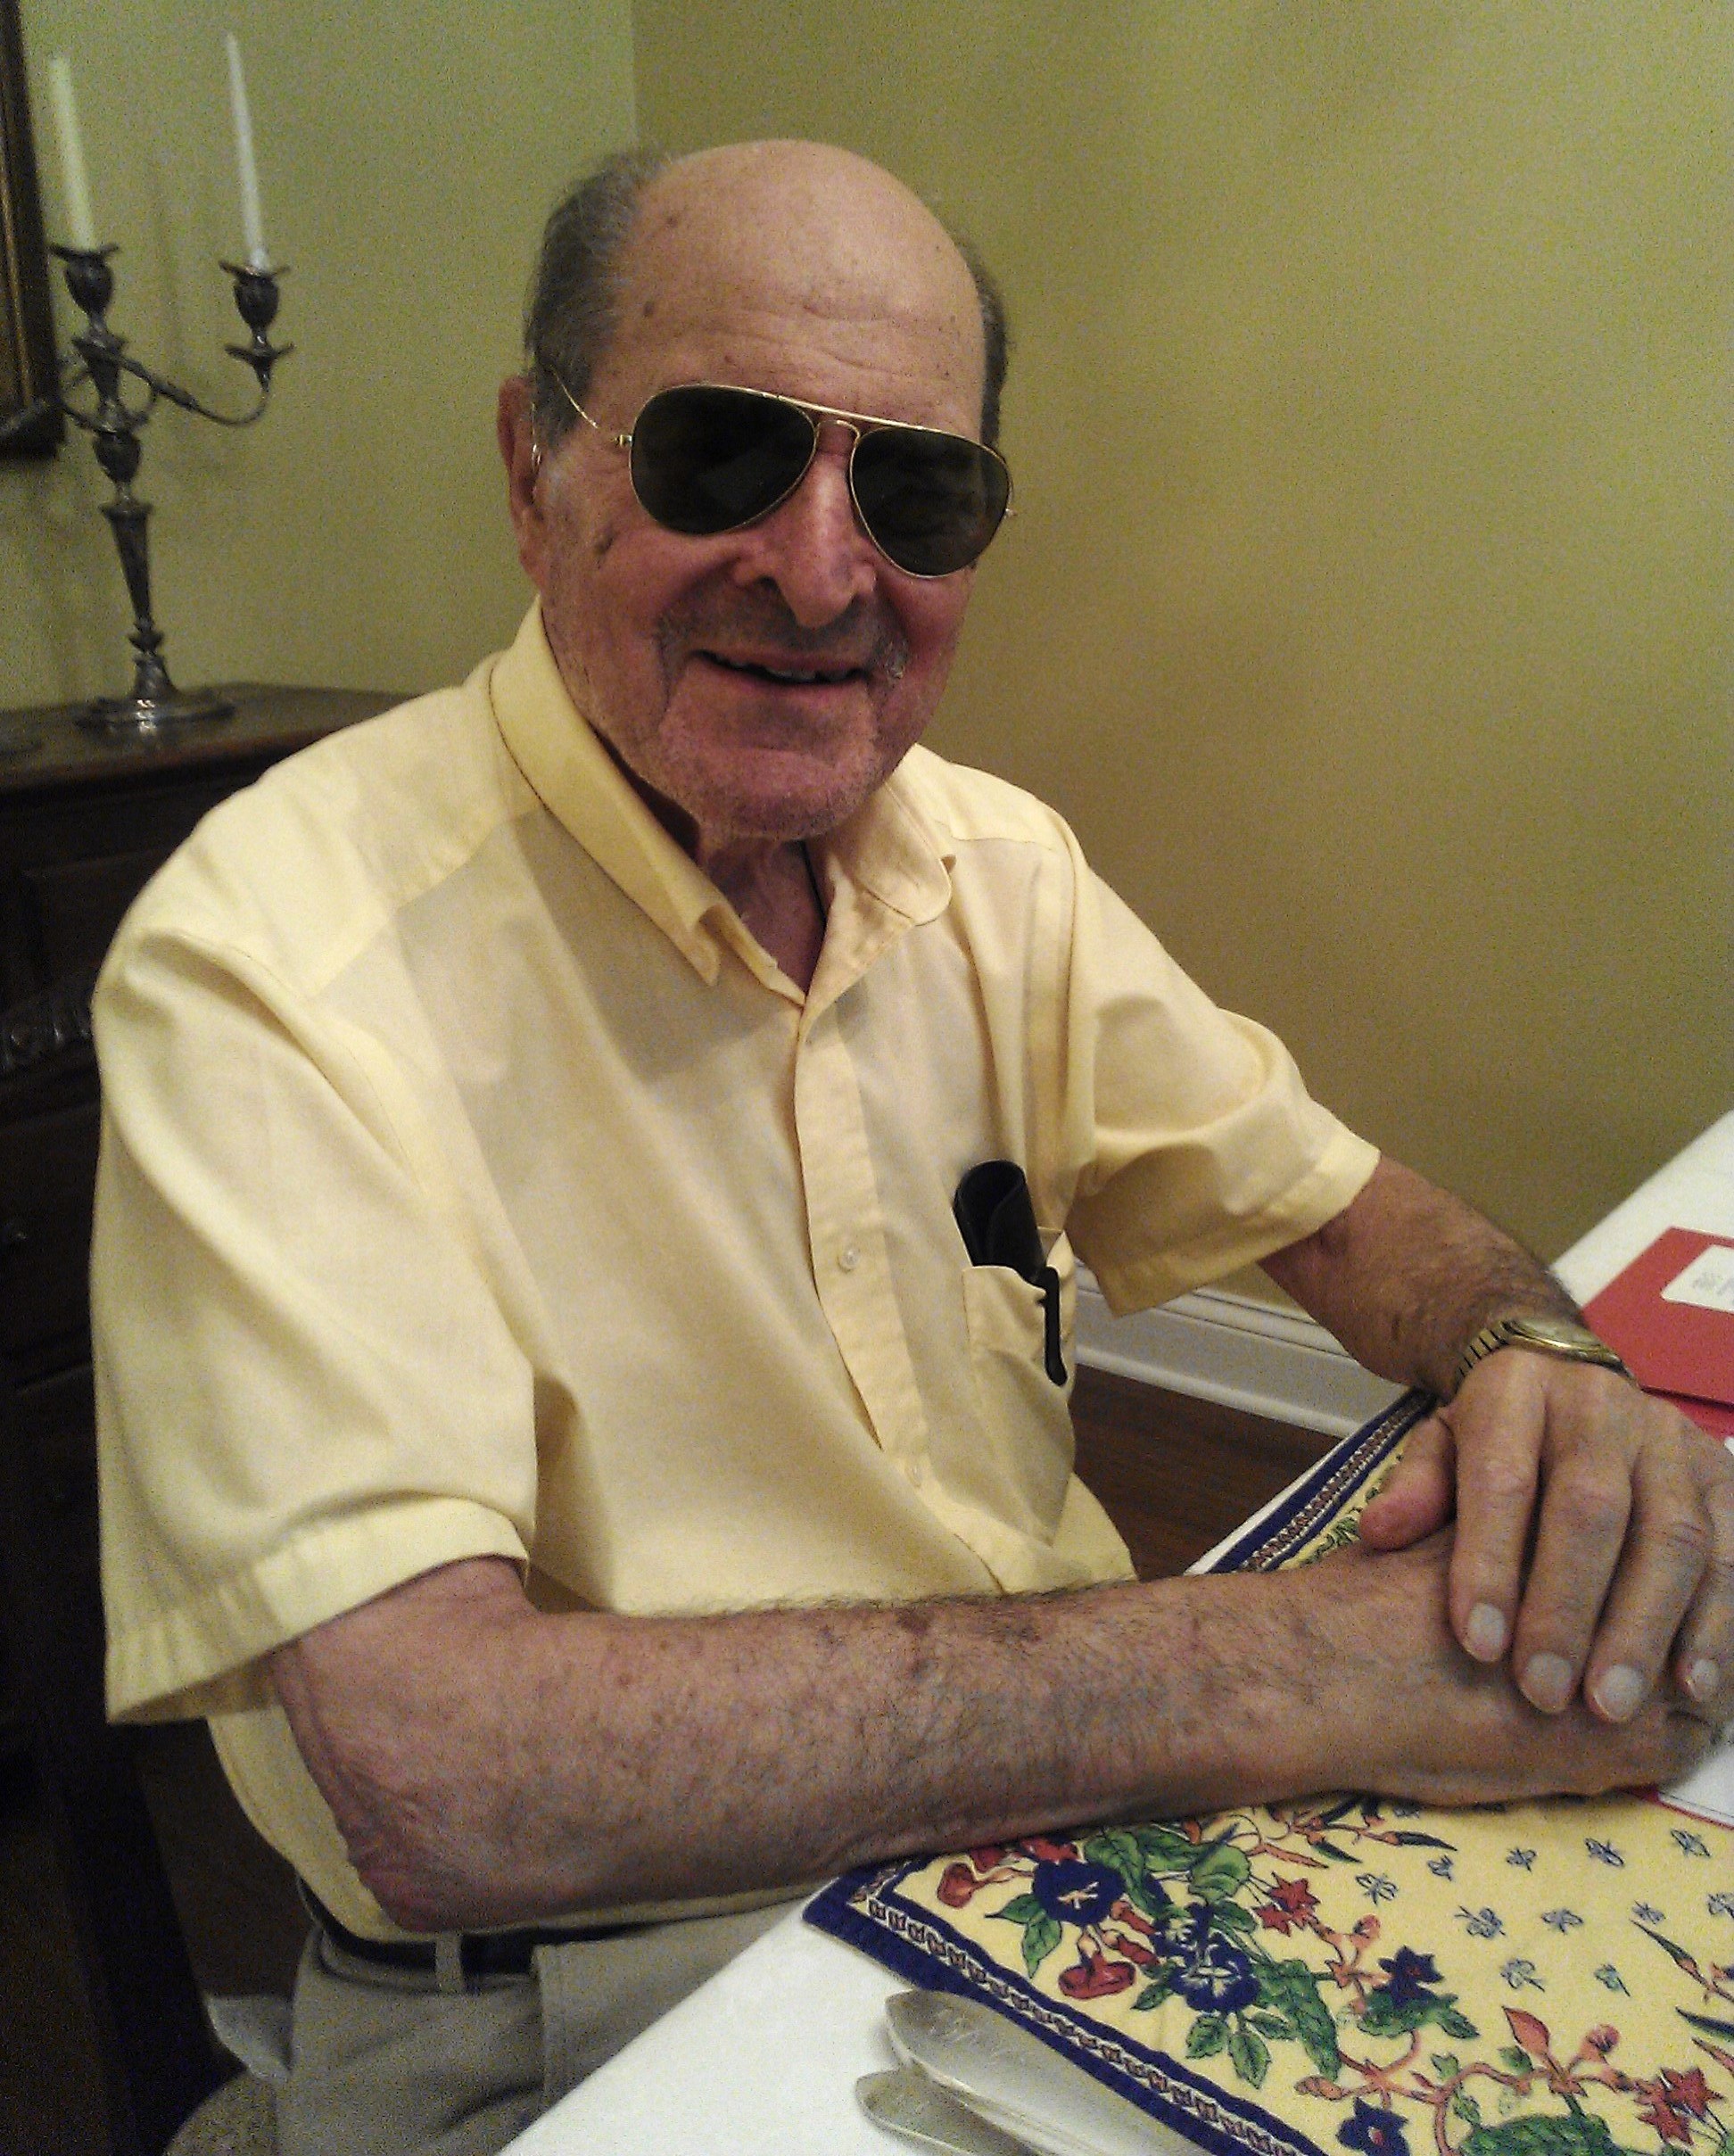 Dr. Heimlich and his Aviator Sunglasses 7_17_14